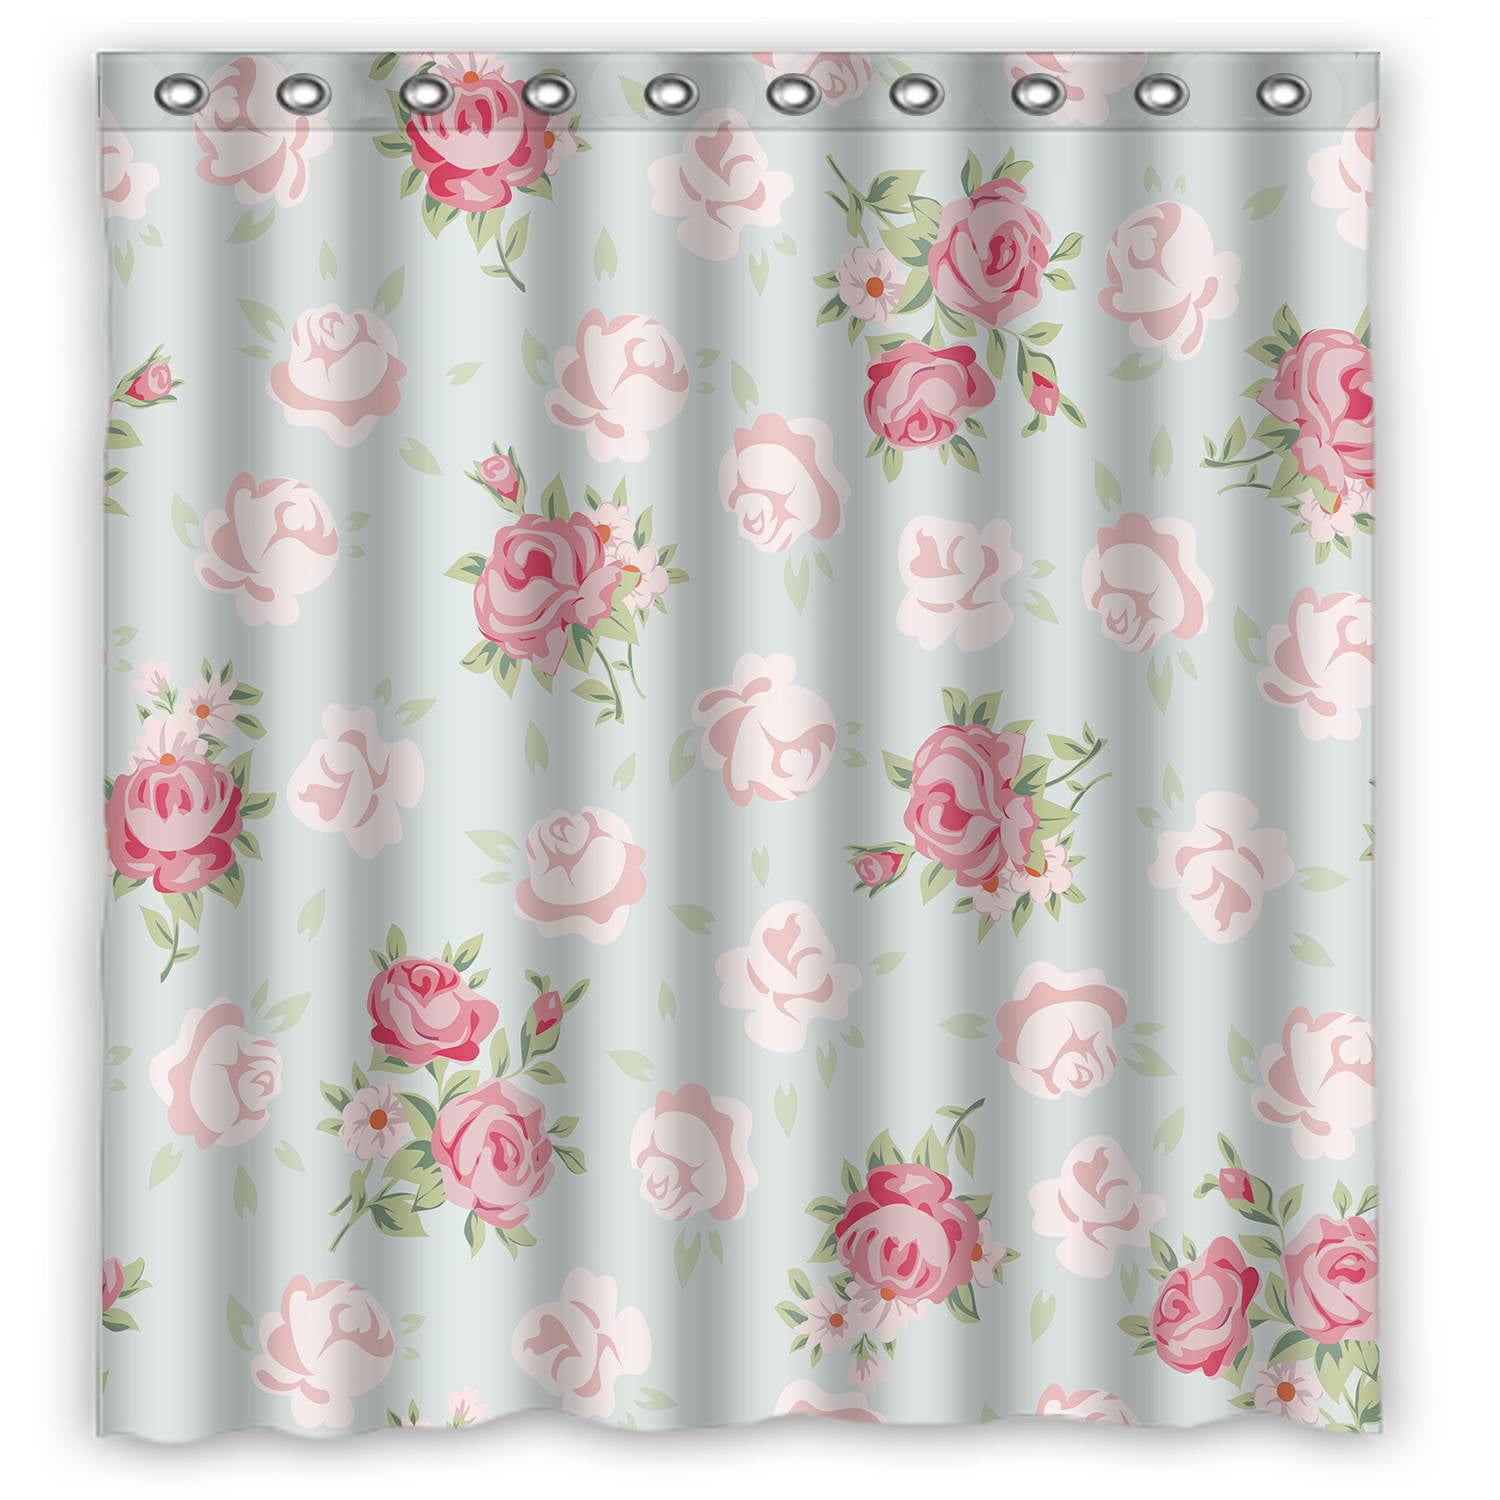 Details about   Victorian Shower Curtain Baroque Colored Roses Print for Bathroom 